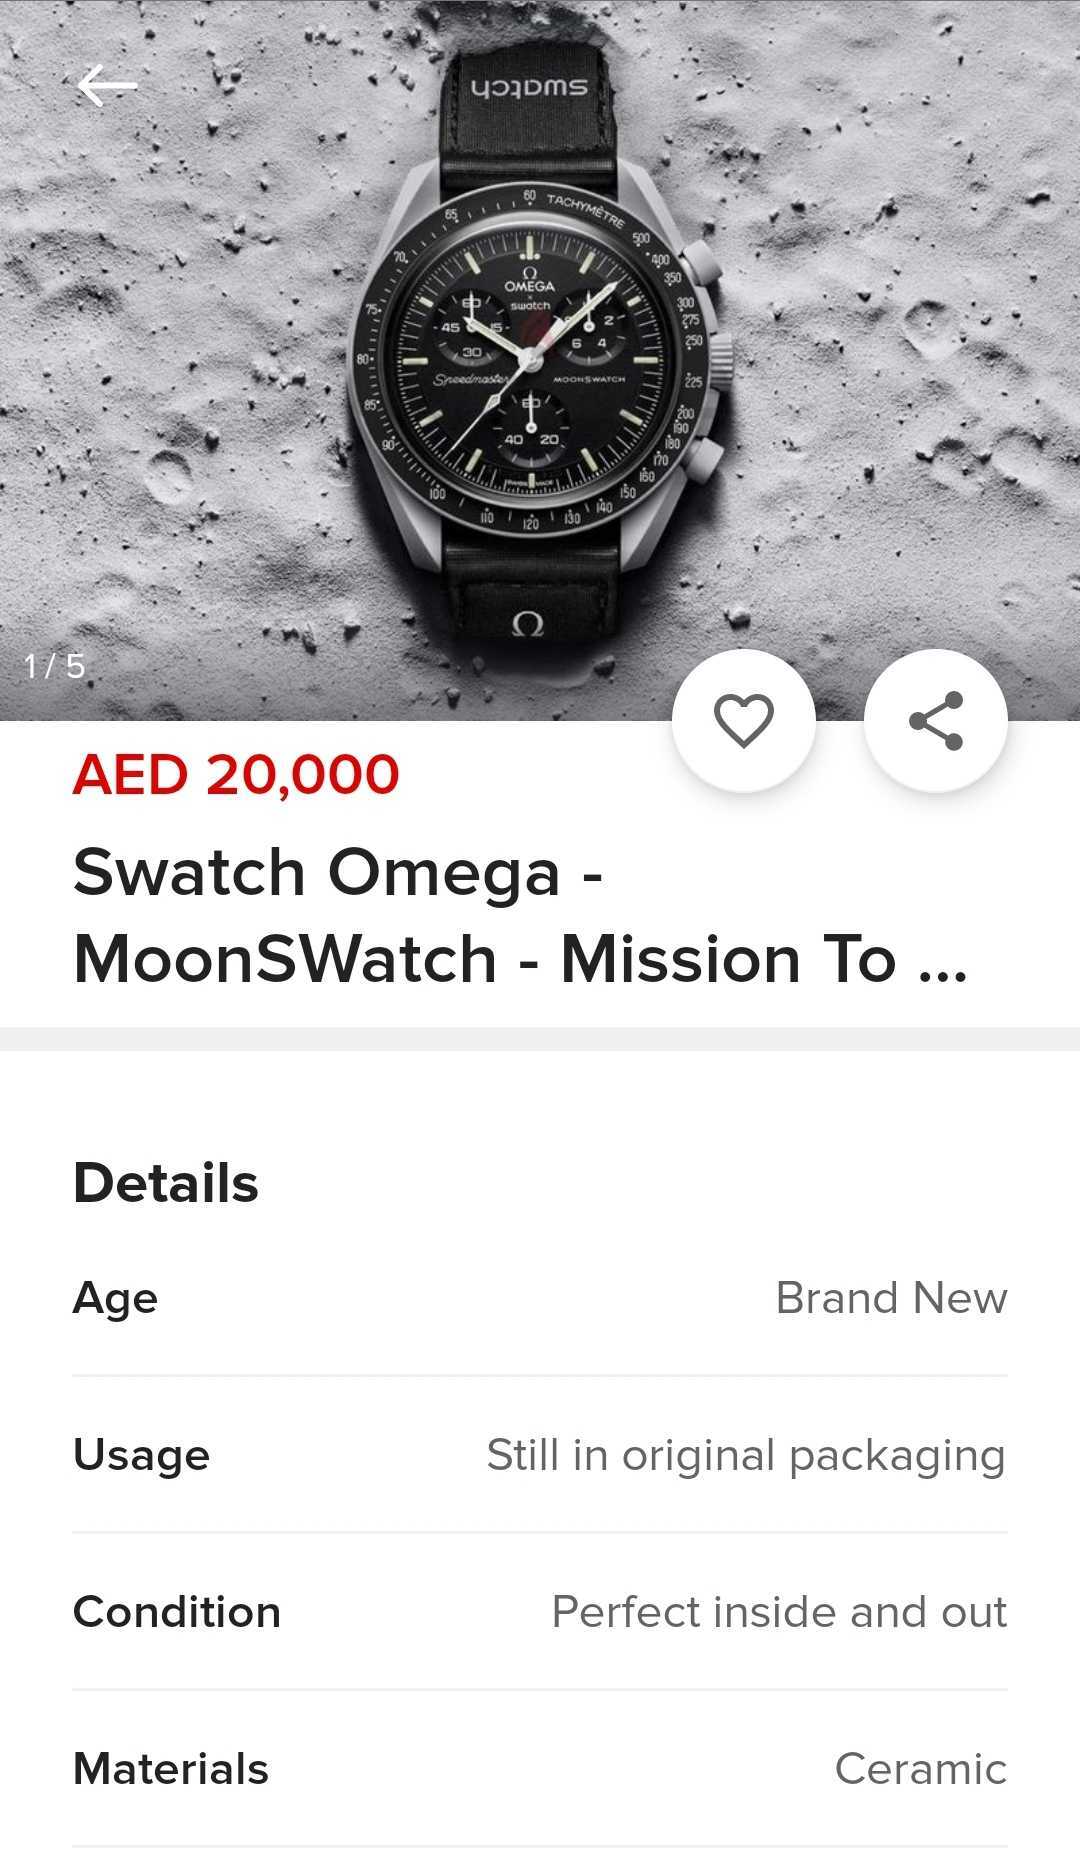 You can afford this Omega x Swatch collab